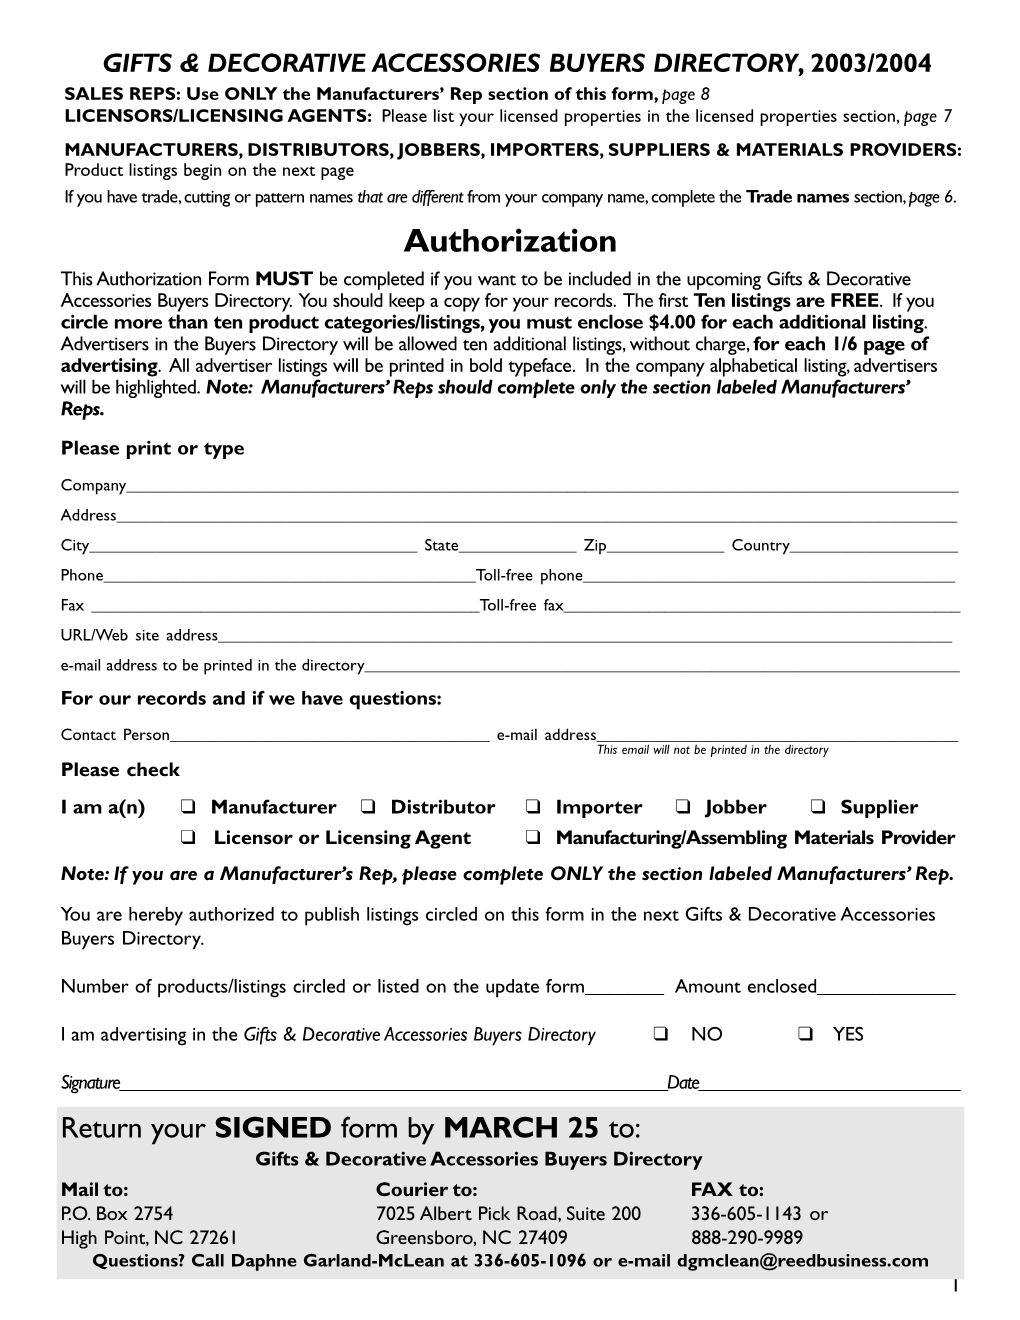 Authorization This Authorization Form MUST Be Completed If You Want to Be Included in the Upcoming Gifts & Decorative Accessories Buyers Directory